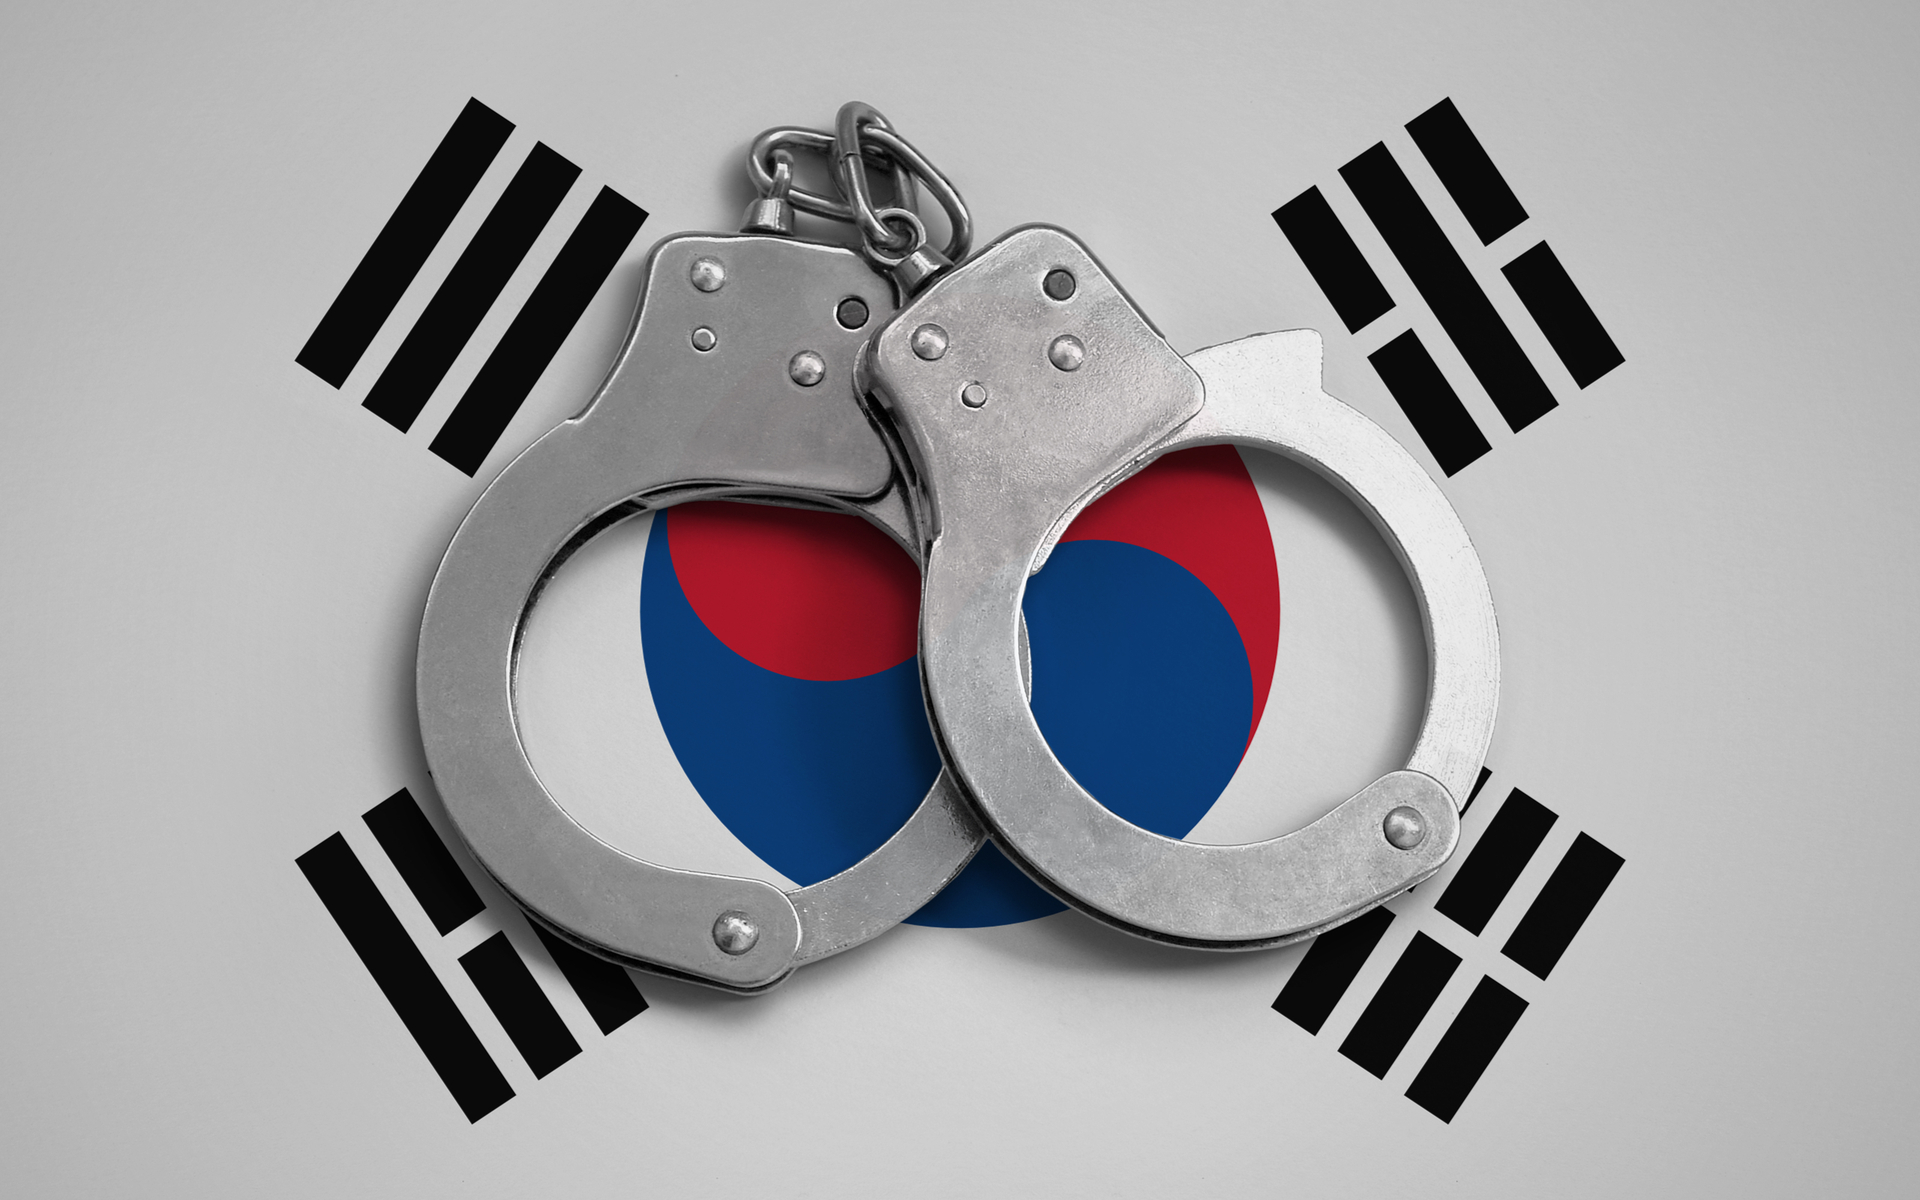 South Korean Crypto Exchanges Aid Police in Child Porn Investigation